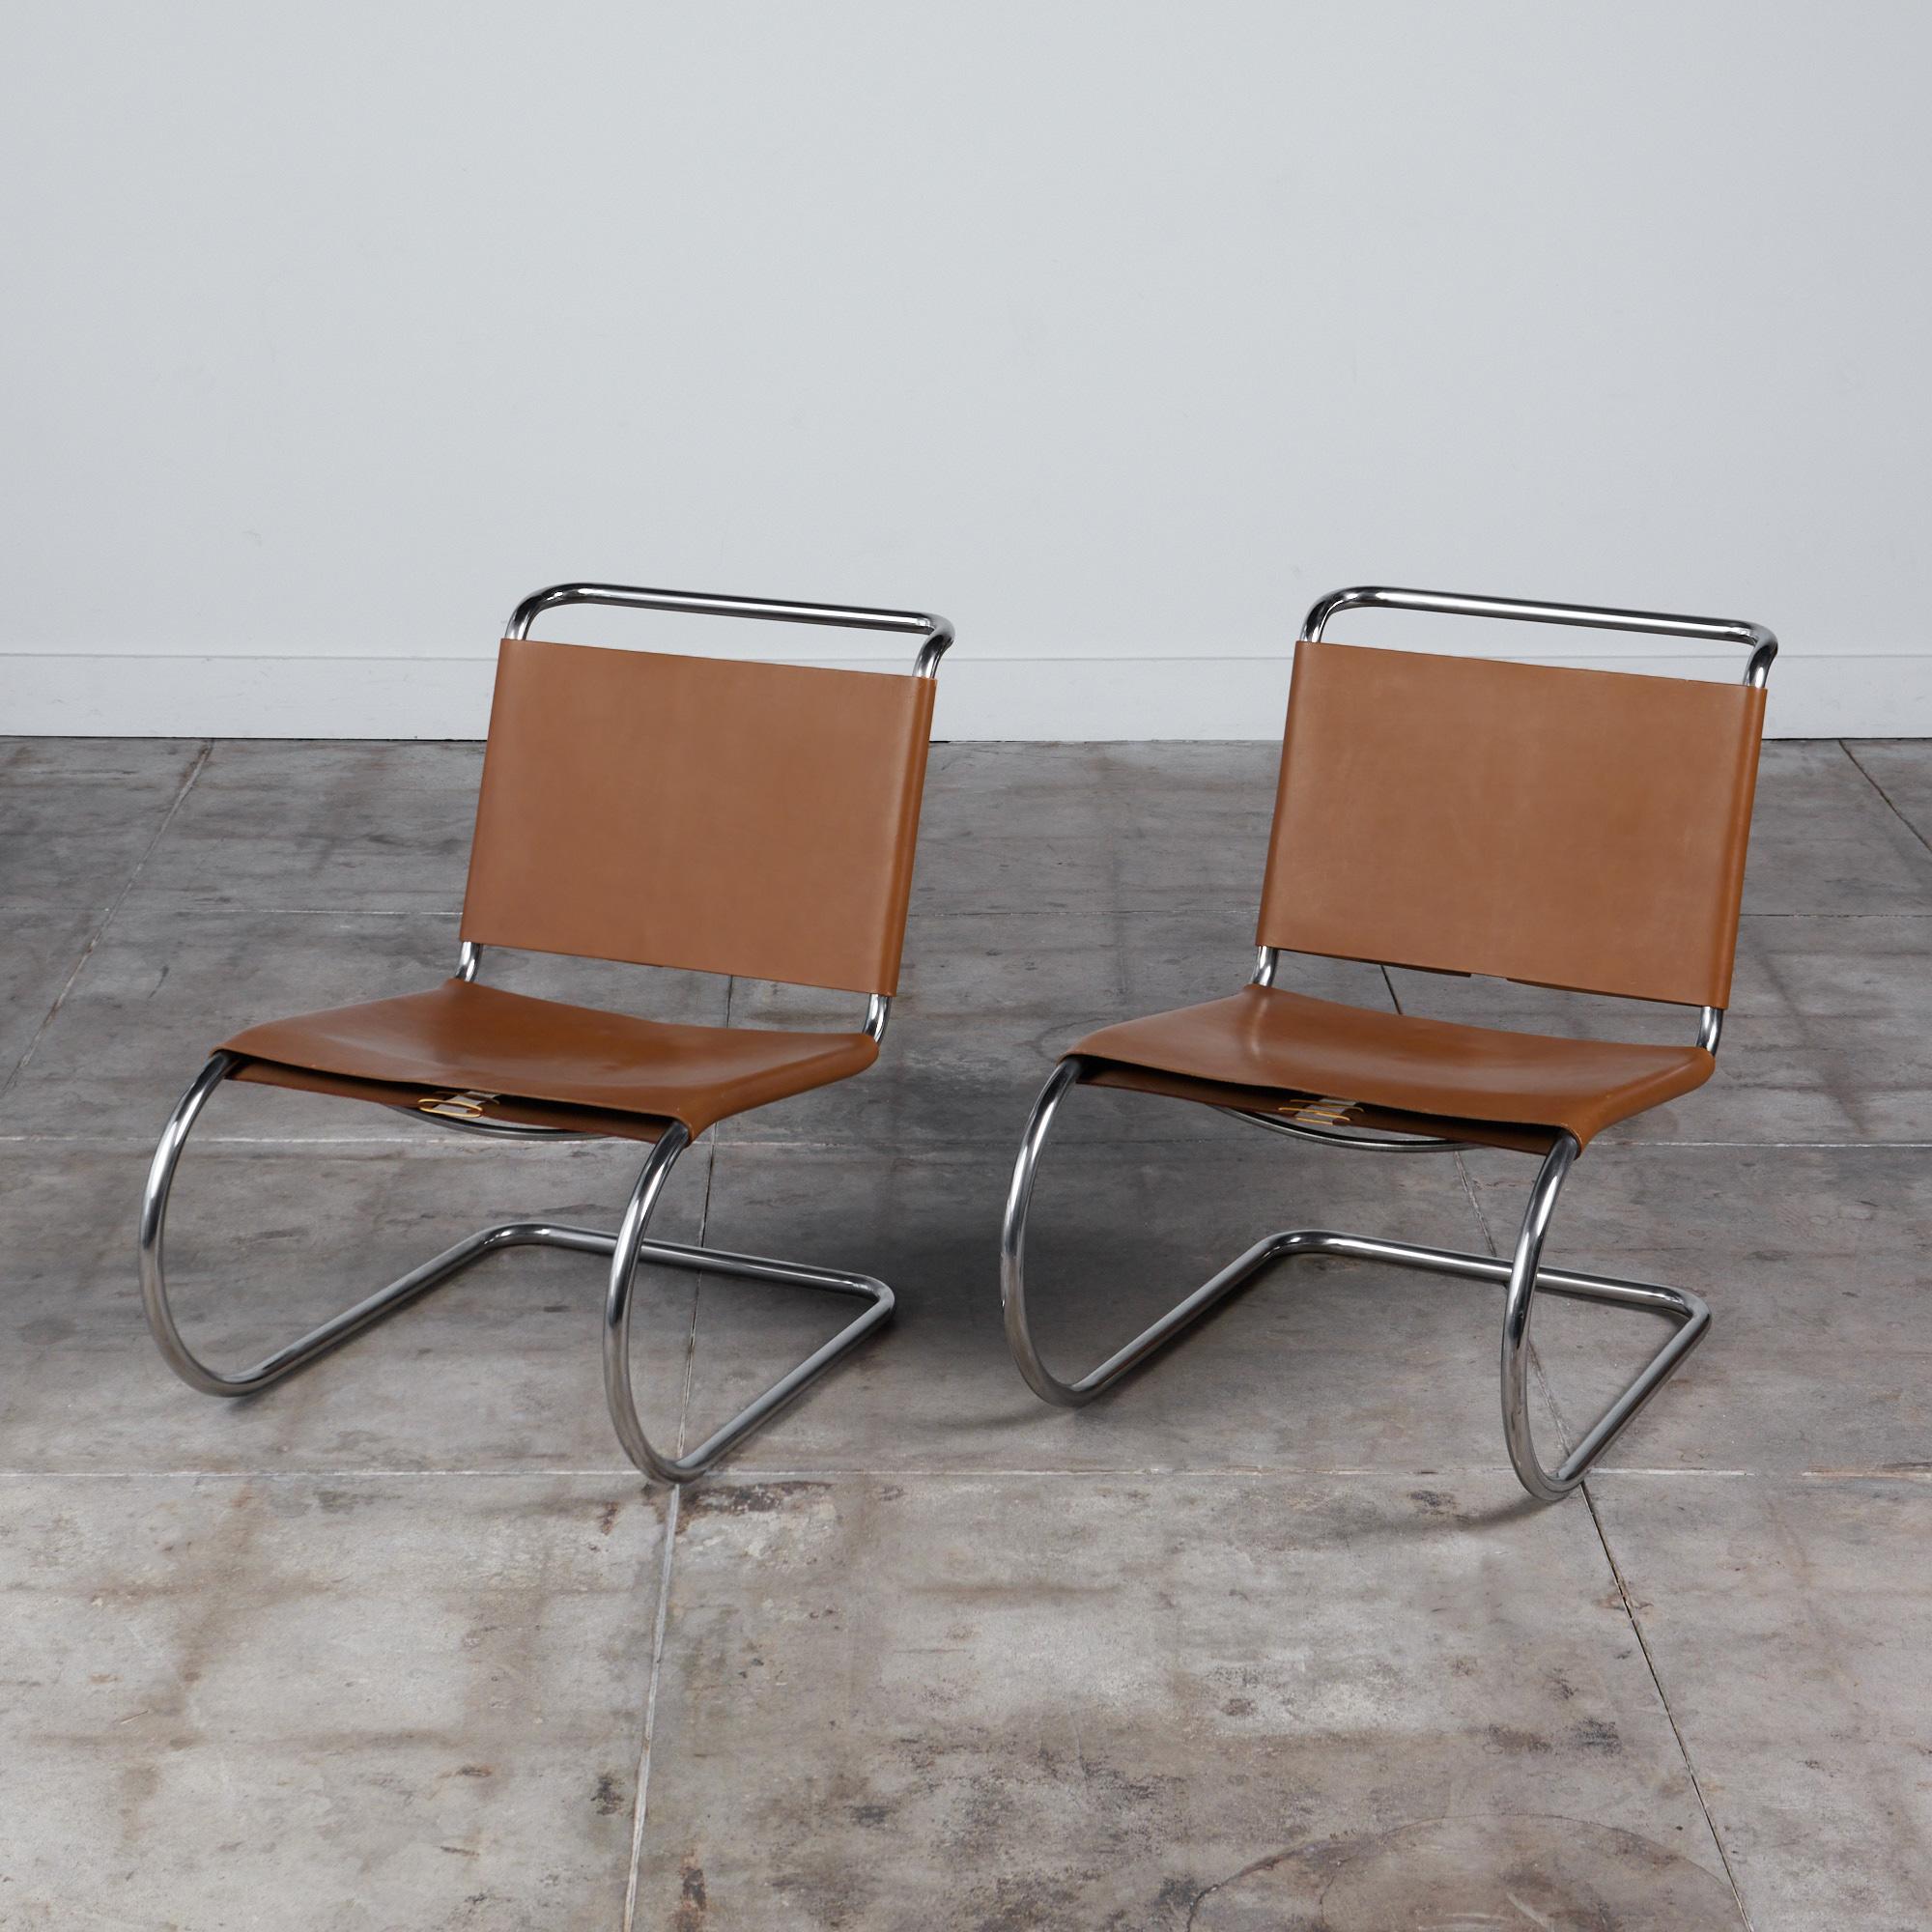 Pair of MR30 cantilevered lounge chairs by Mies van der Rohe for Knoll, c.1960s. The chairs feature a tubular chrome plated steel frame with a camel colored leather seat and backrest. The backrest and underside of the seat are finished with leather